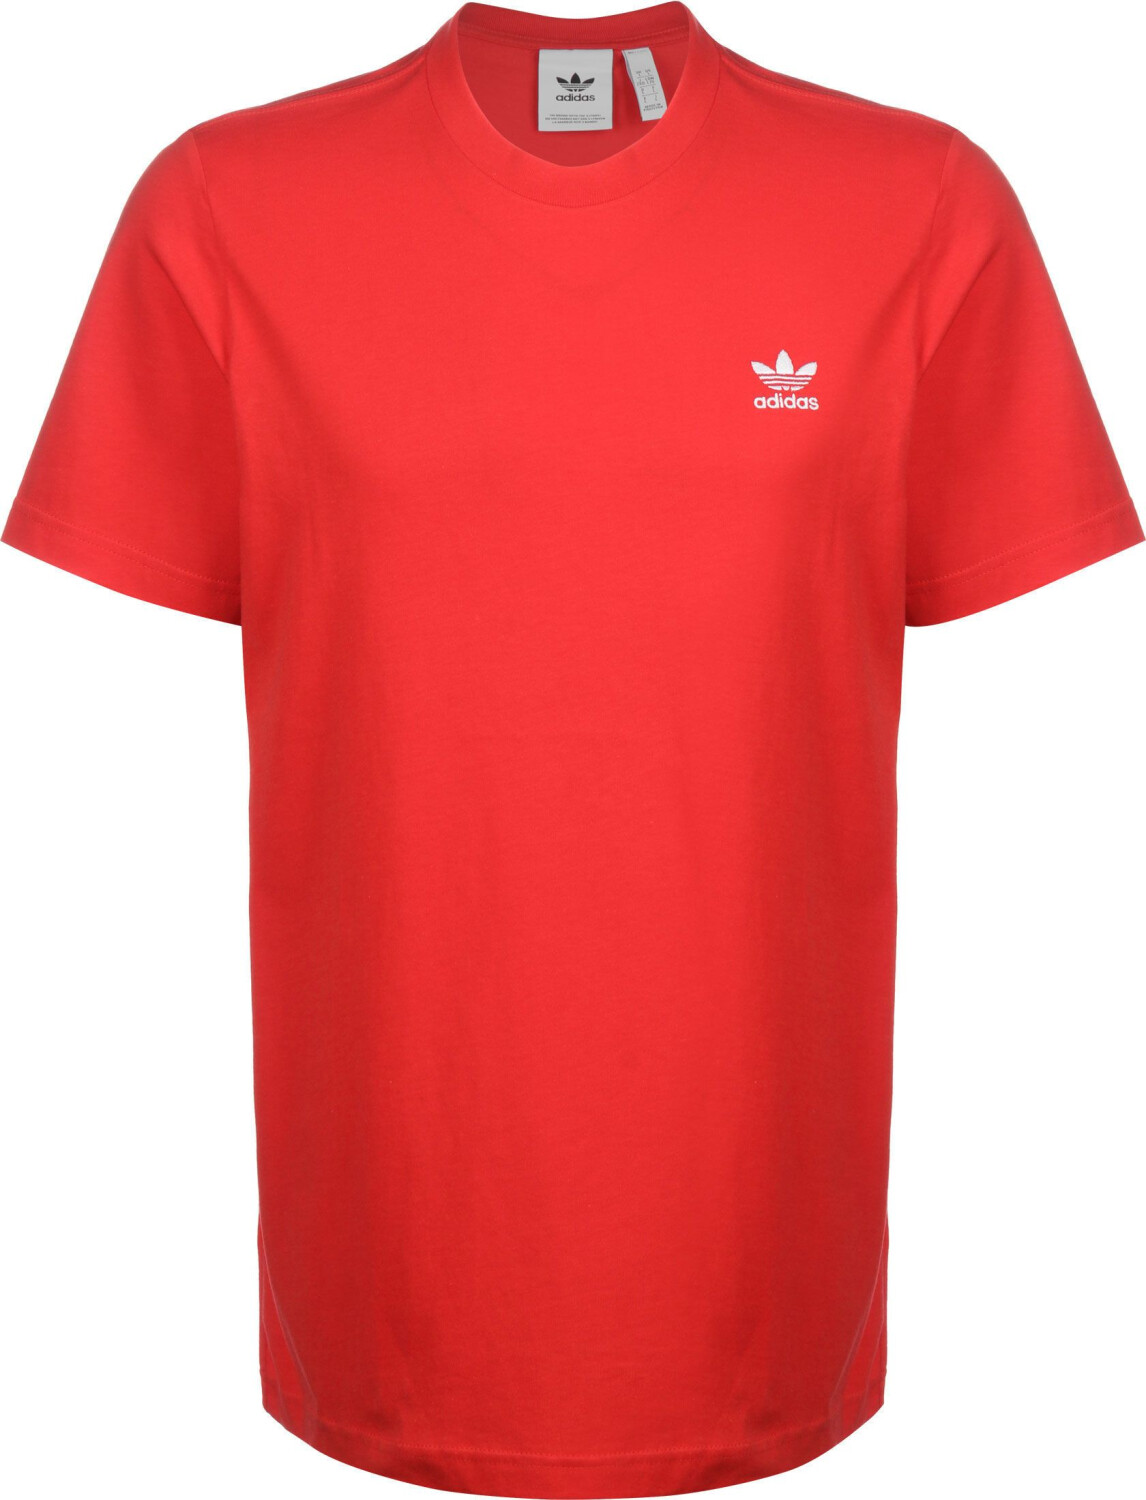 Buy Adidas Trefoil Essentials T-Shirt from £9.99 (Today) – Best Deals on